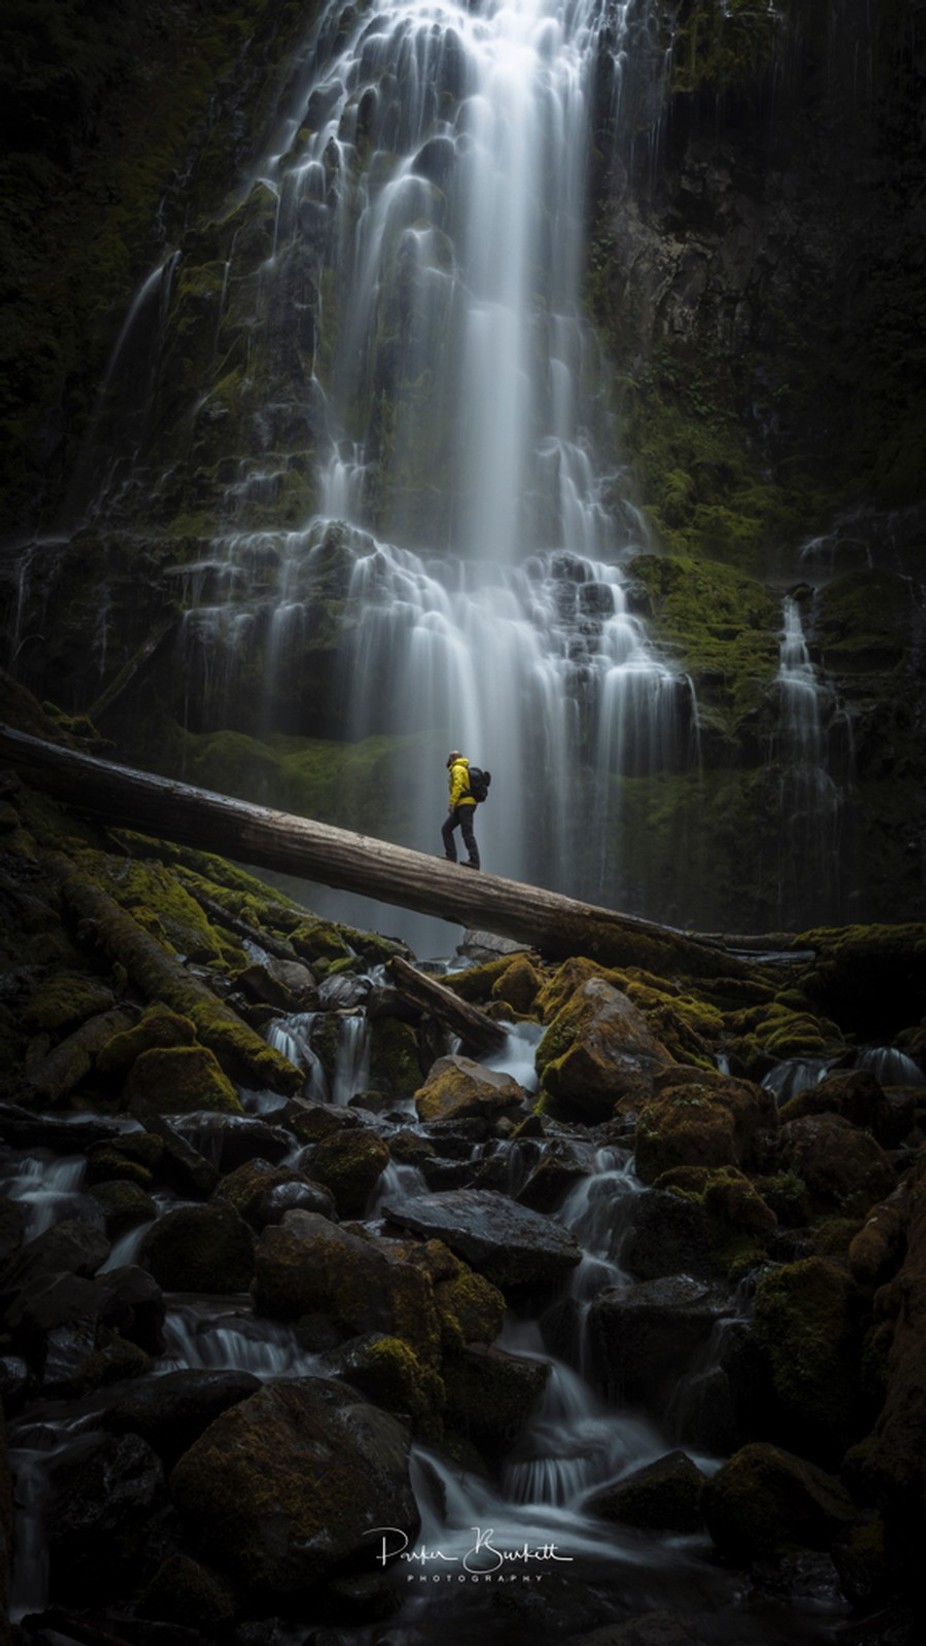 We are but a tiny part of this earth.... by sethburkett - People And Waterfalls Photo Contest